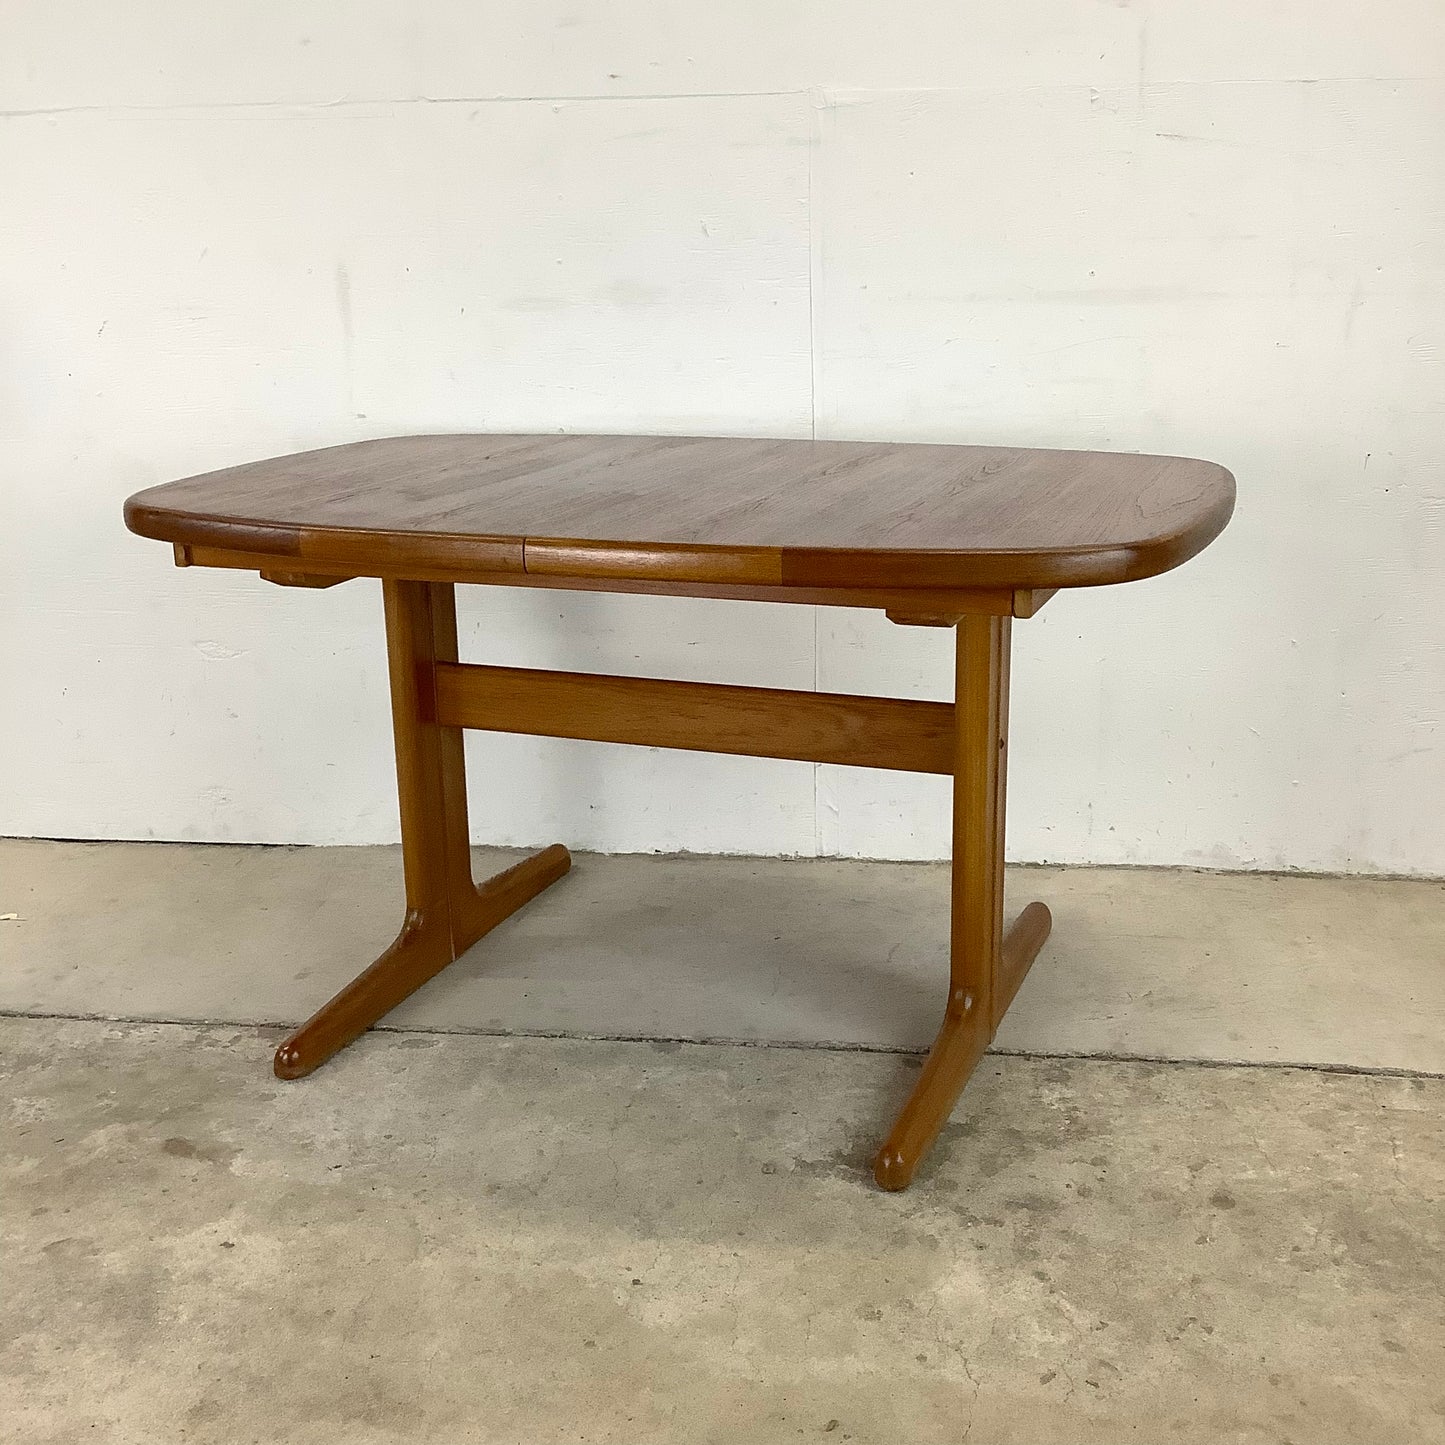 Scandinavian Modern Teak Dining Table With Two Leaves